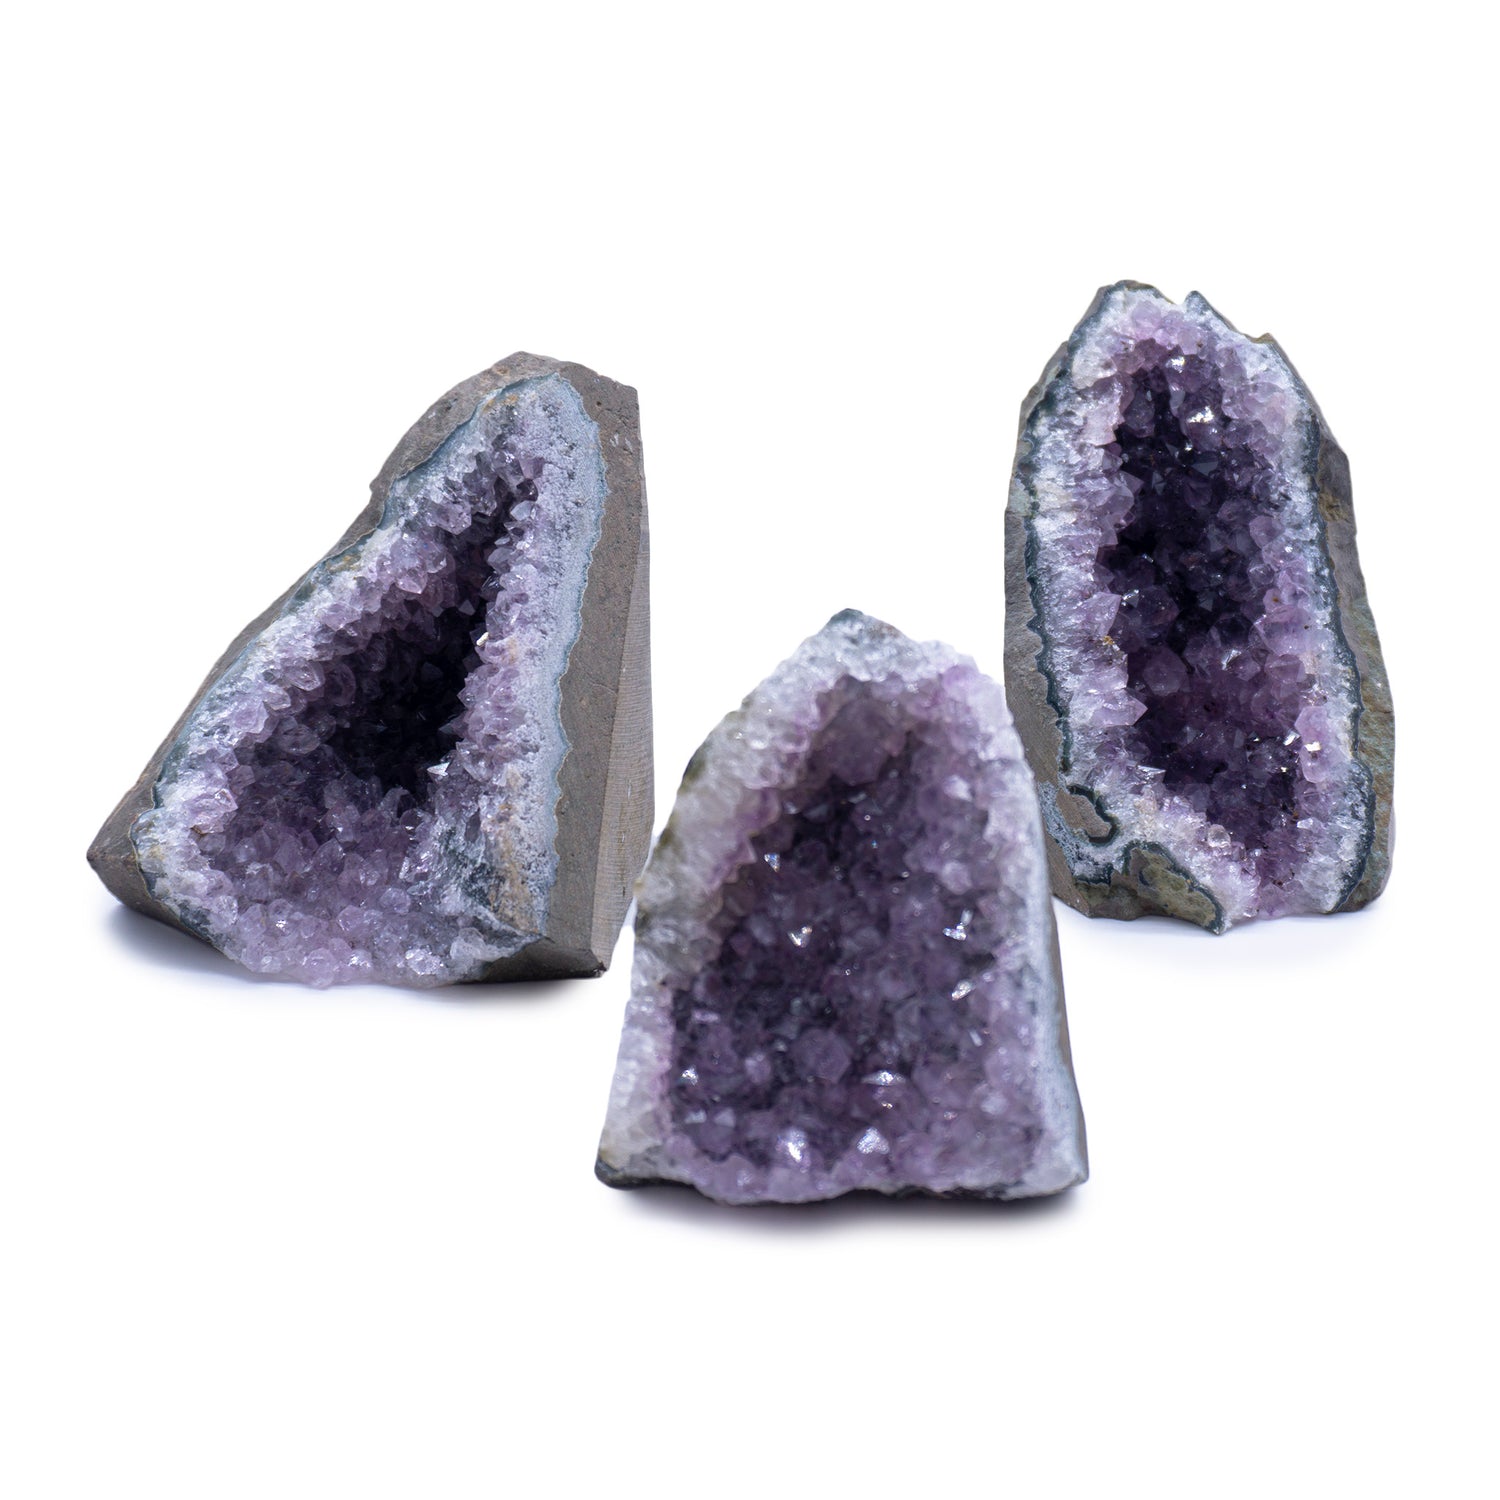 Group of three large amethyst geodes